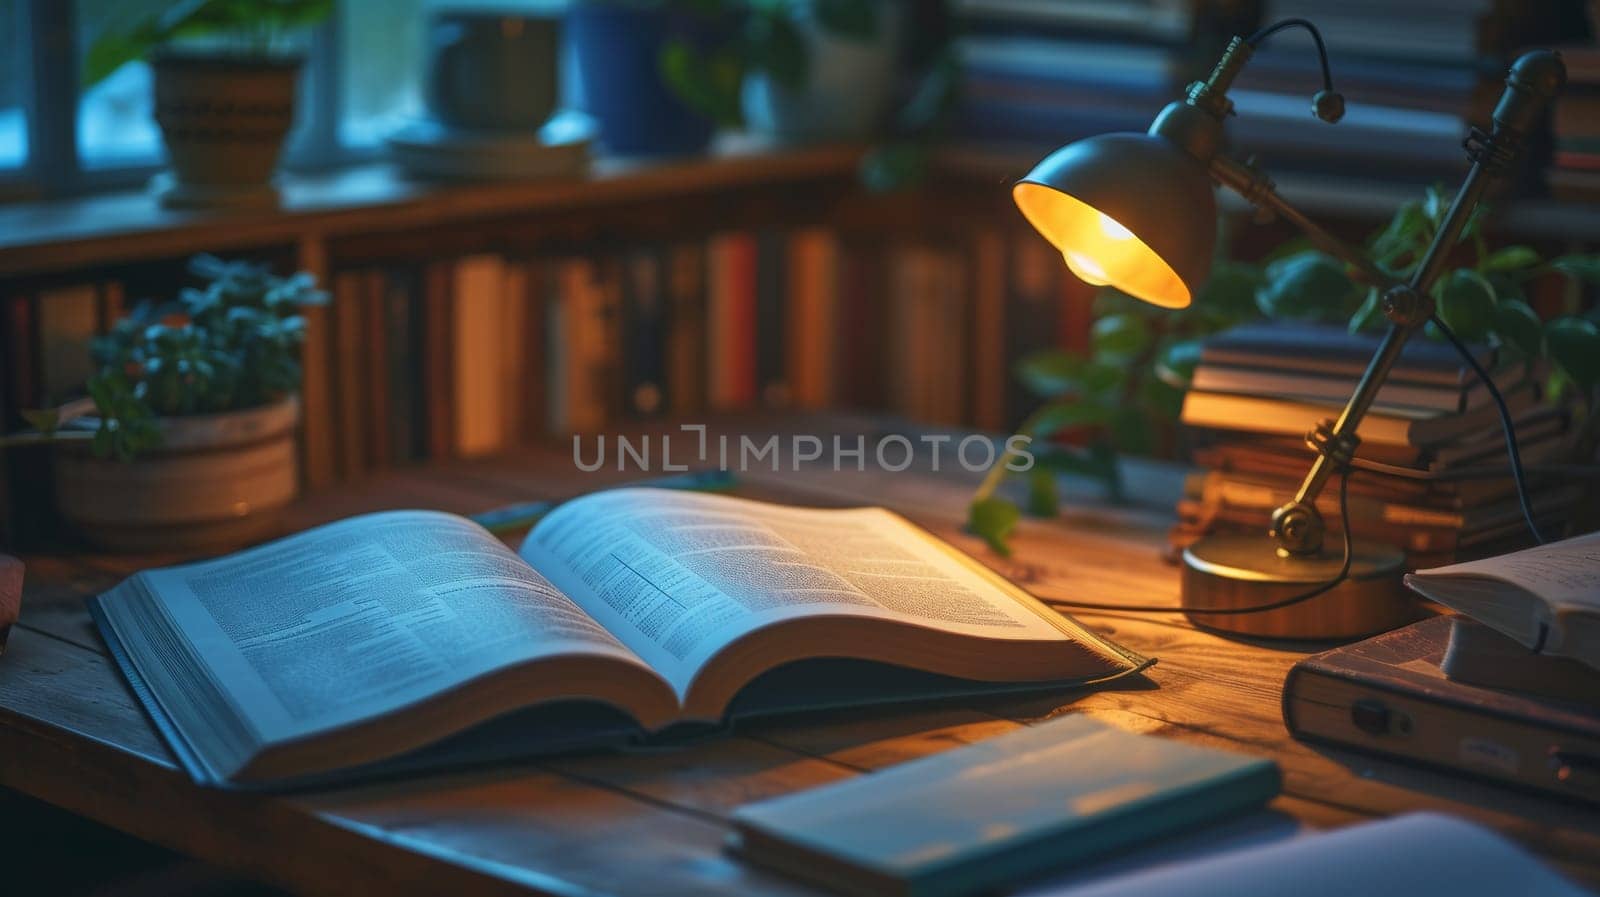 A book on a table with lamp and potted plants